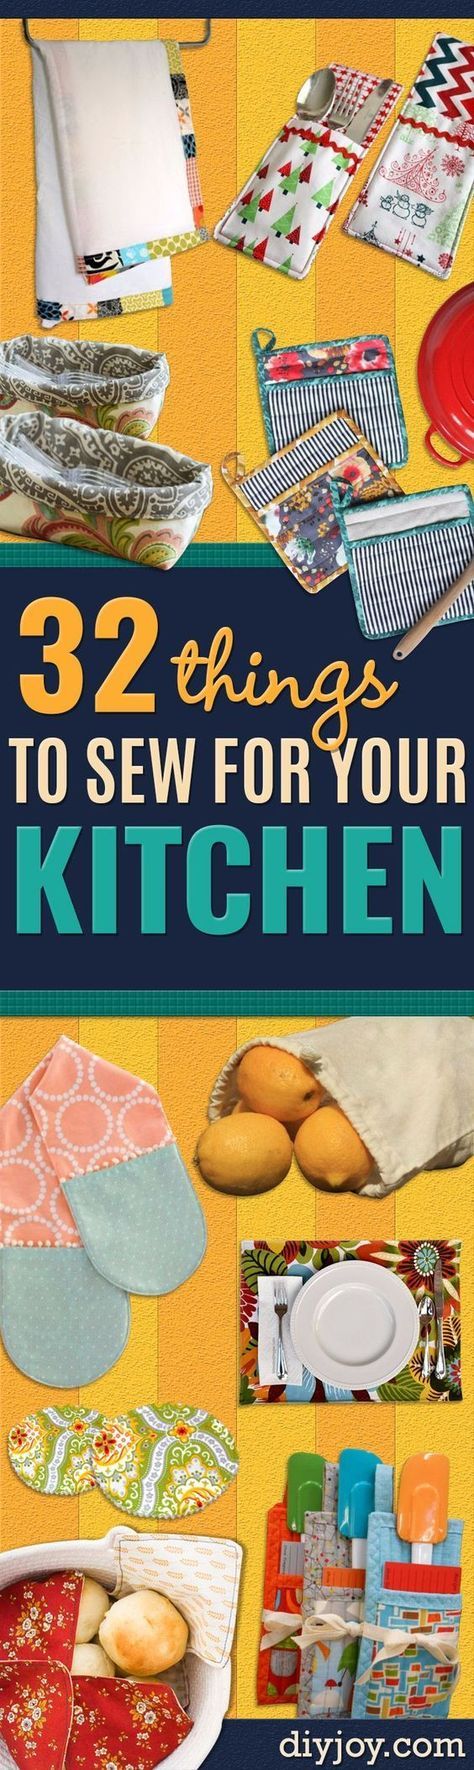 Sew Ins, Syprosjekter For Nybegynnere, Bordados Tambour, Projek Menjahit, Trendy Sewing Projects, Sewing 101, Costura Diy, Ideas Hogar, Beginner Sewing Projects Easy